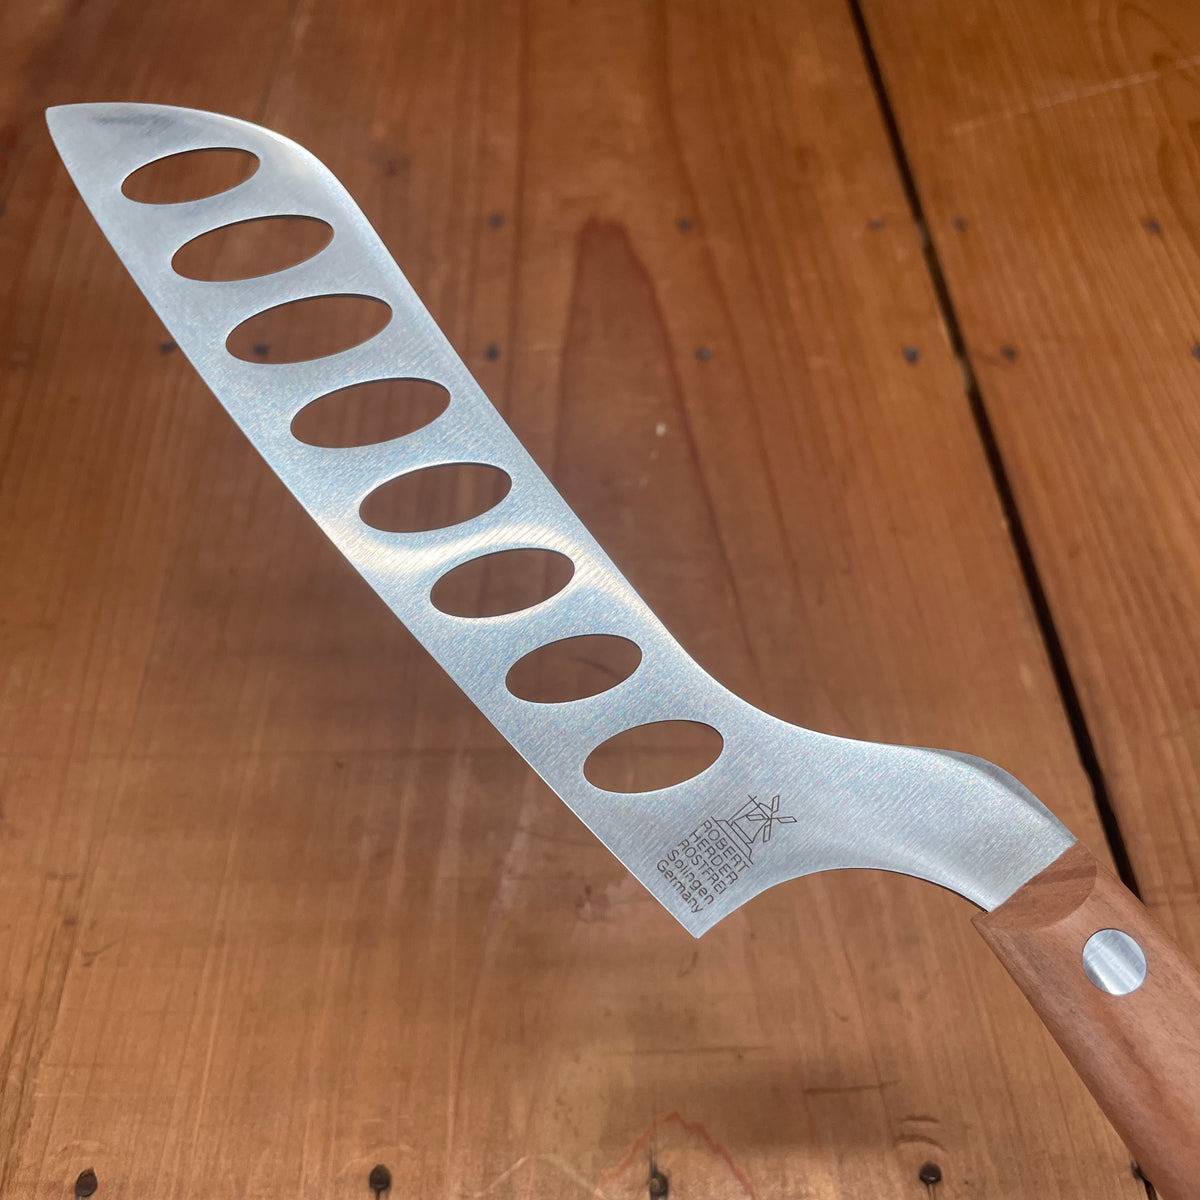 Windmühlenmesser 6" Langloch Cheese Knife Stainless Cherry